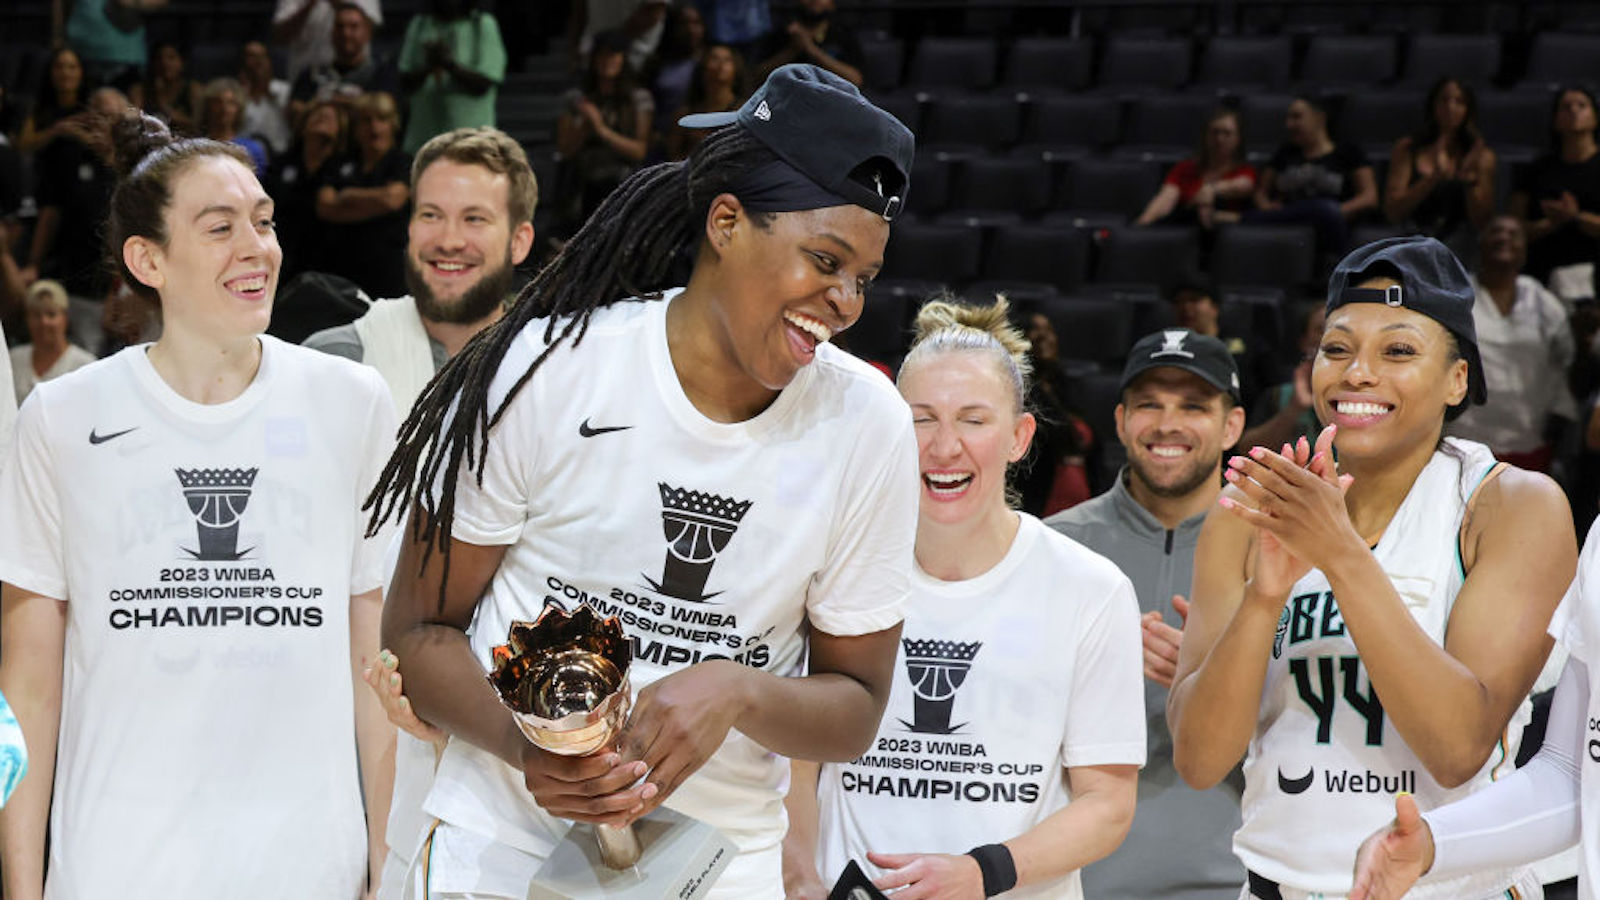 Jonquel Jones #35 of the New York Liberty accepts the MVP trophy after the team's 82-63 victory over the Las Vegas Aces in the 2023 Commissioner's Cup Championship game at Michelob ULTRA Arena on August 15, 2023 in Las Vegas, Nevada.